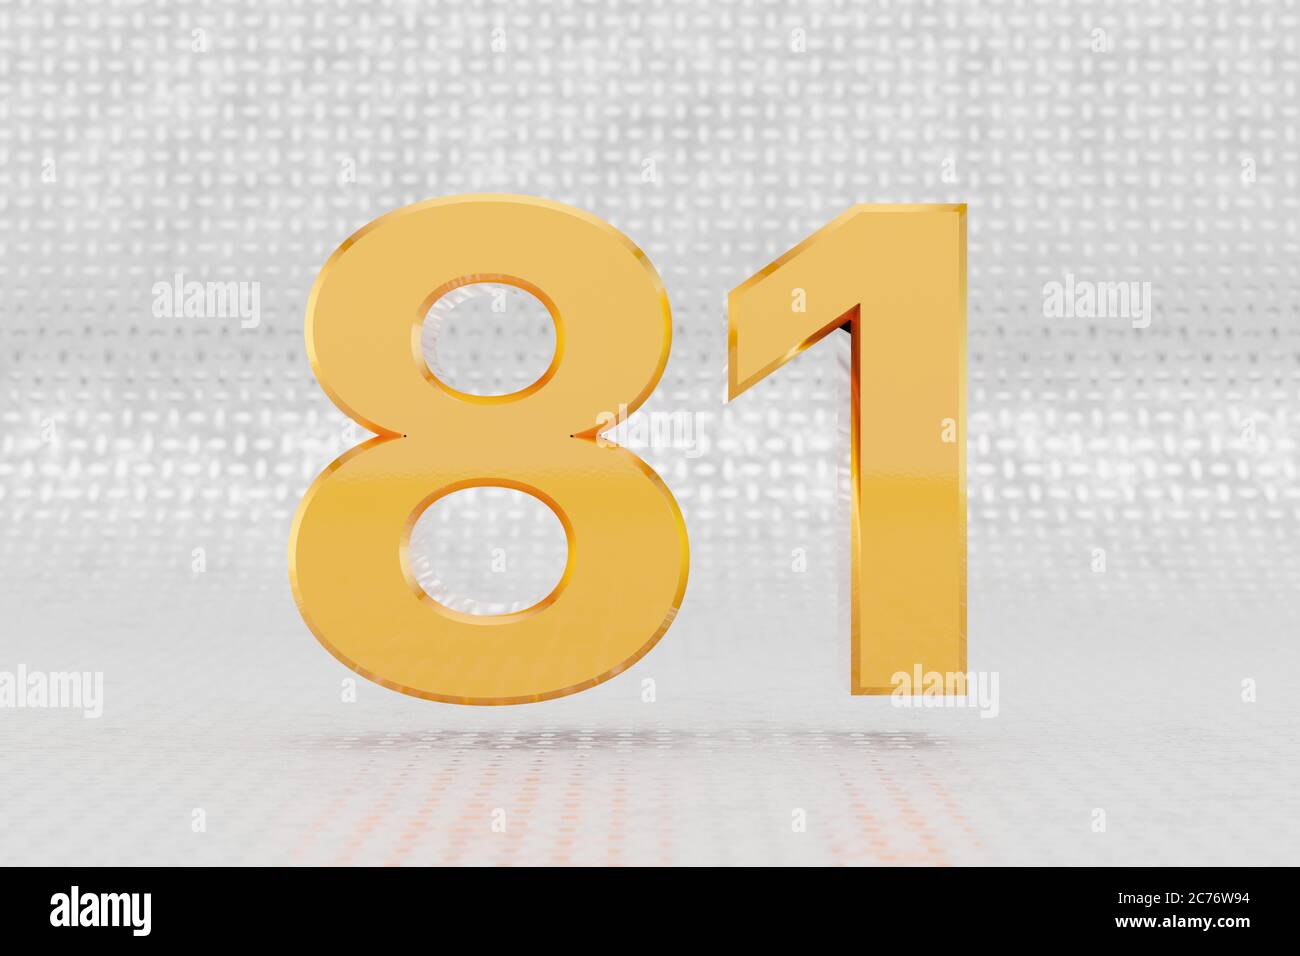 Yellow 3d number 81. Glossy yellow metallic number on metal floor background. Shiny gold metal alphabet with studio light reflections. 3d rendered font character. Stock Photo